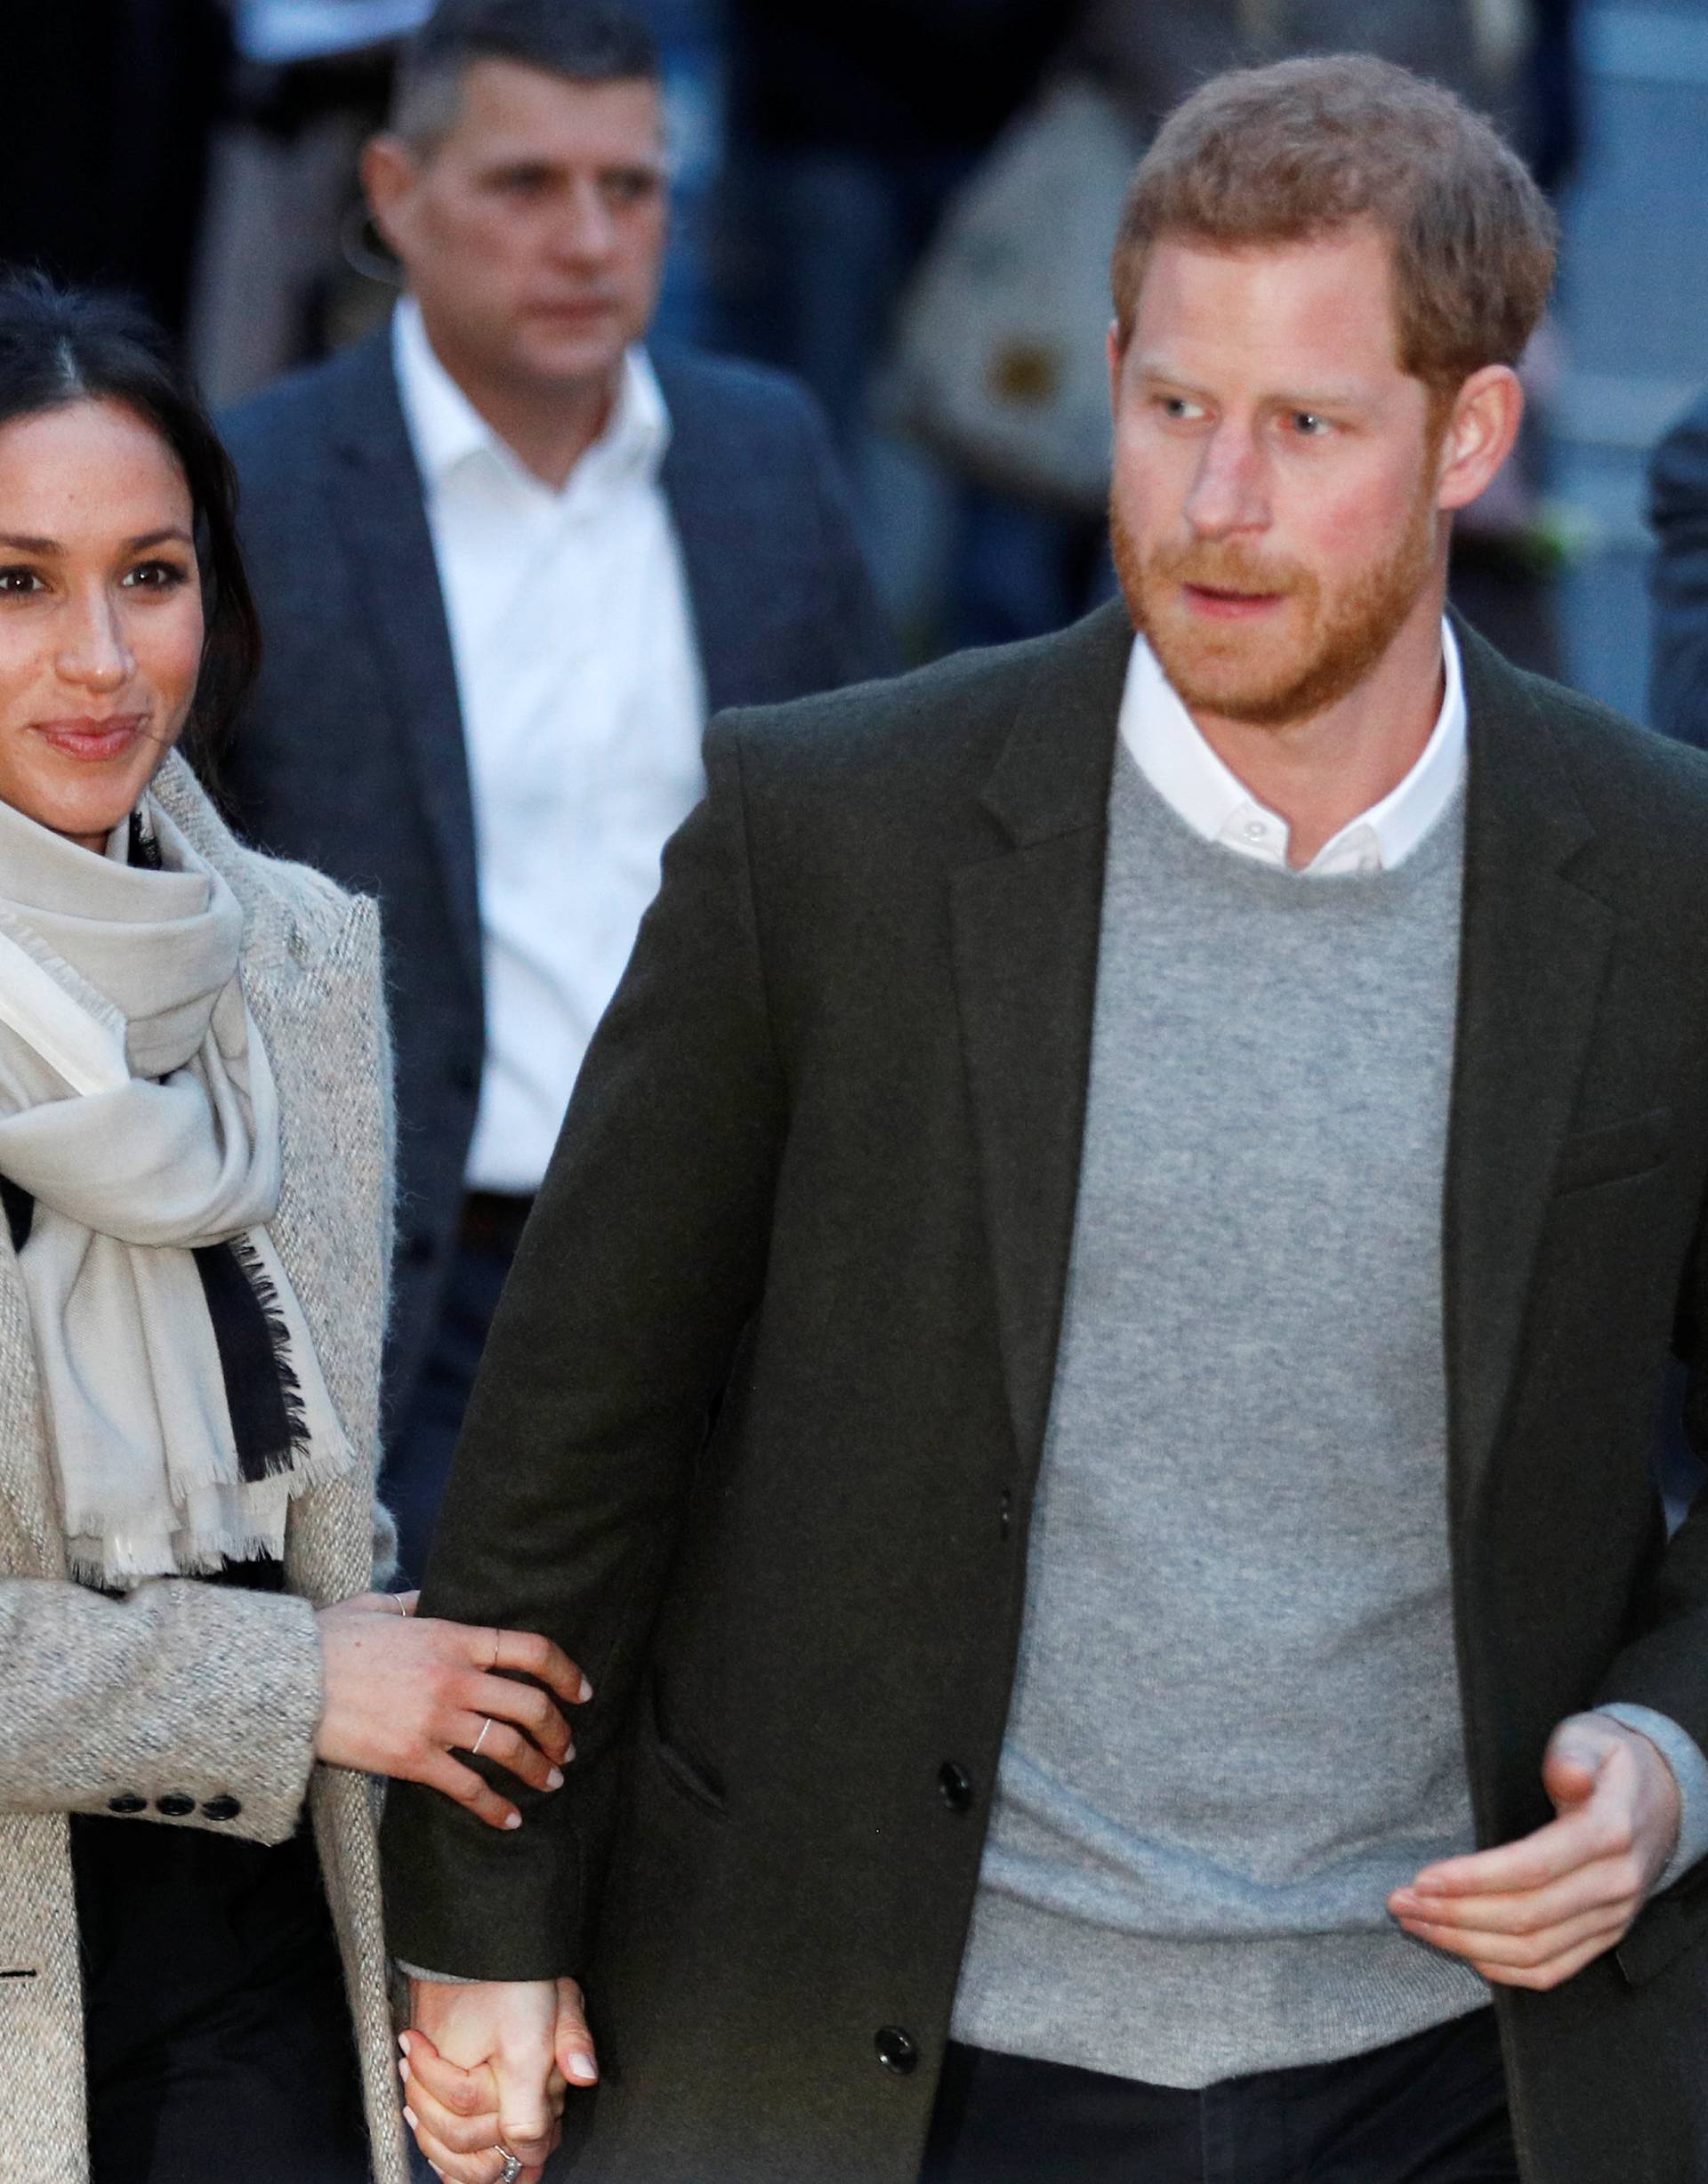 Britain's Prince Harry and his fiancee Meghan Markle leave after visiting radio station Reprezent FM, in Brixton, London